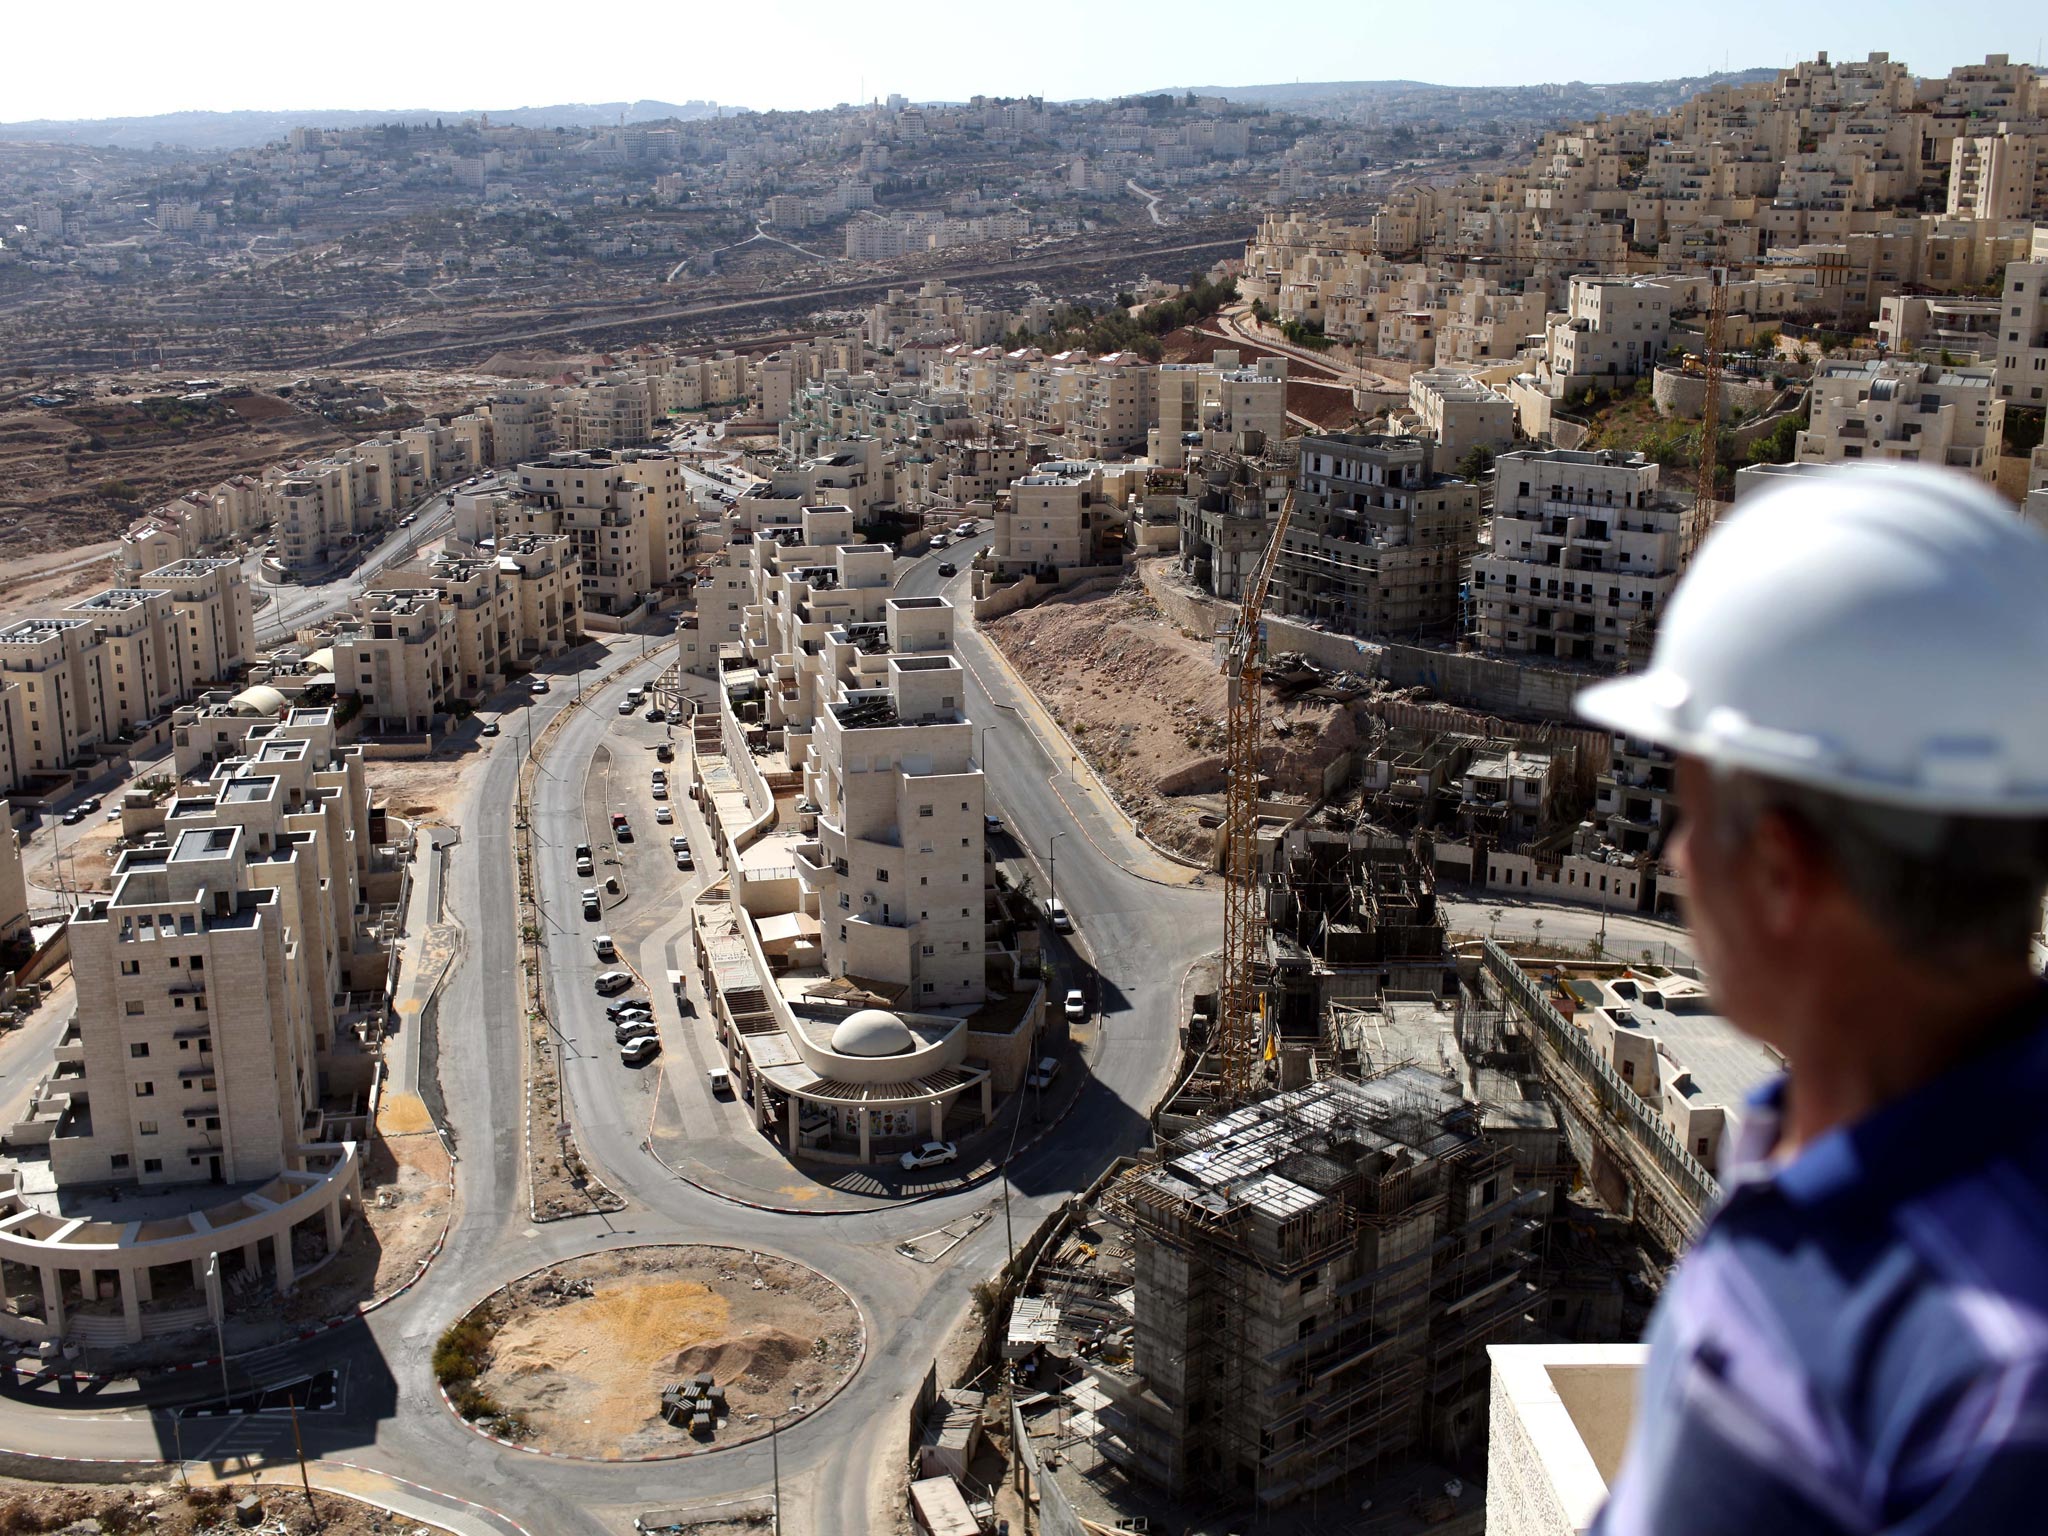 Israeli construction in the West Bank and East Jerusalem angered the EU